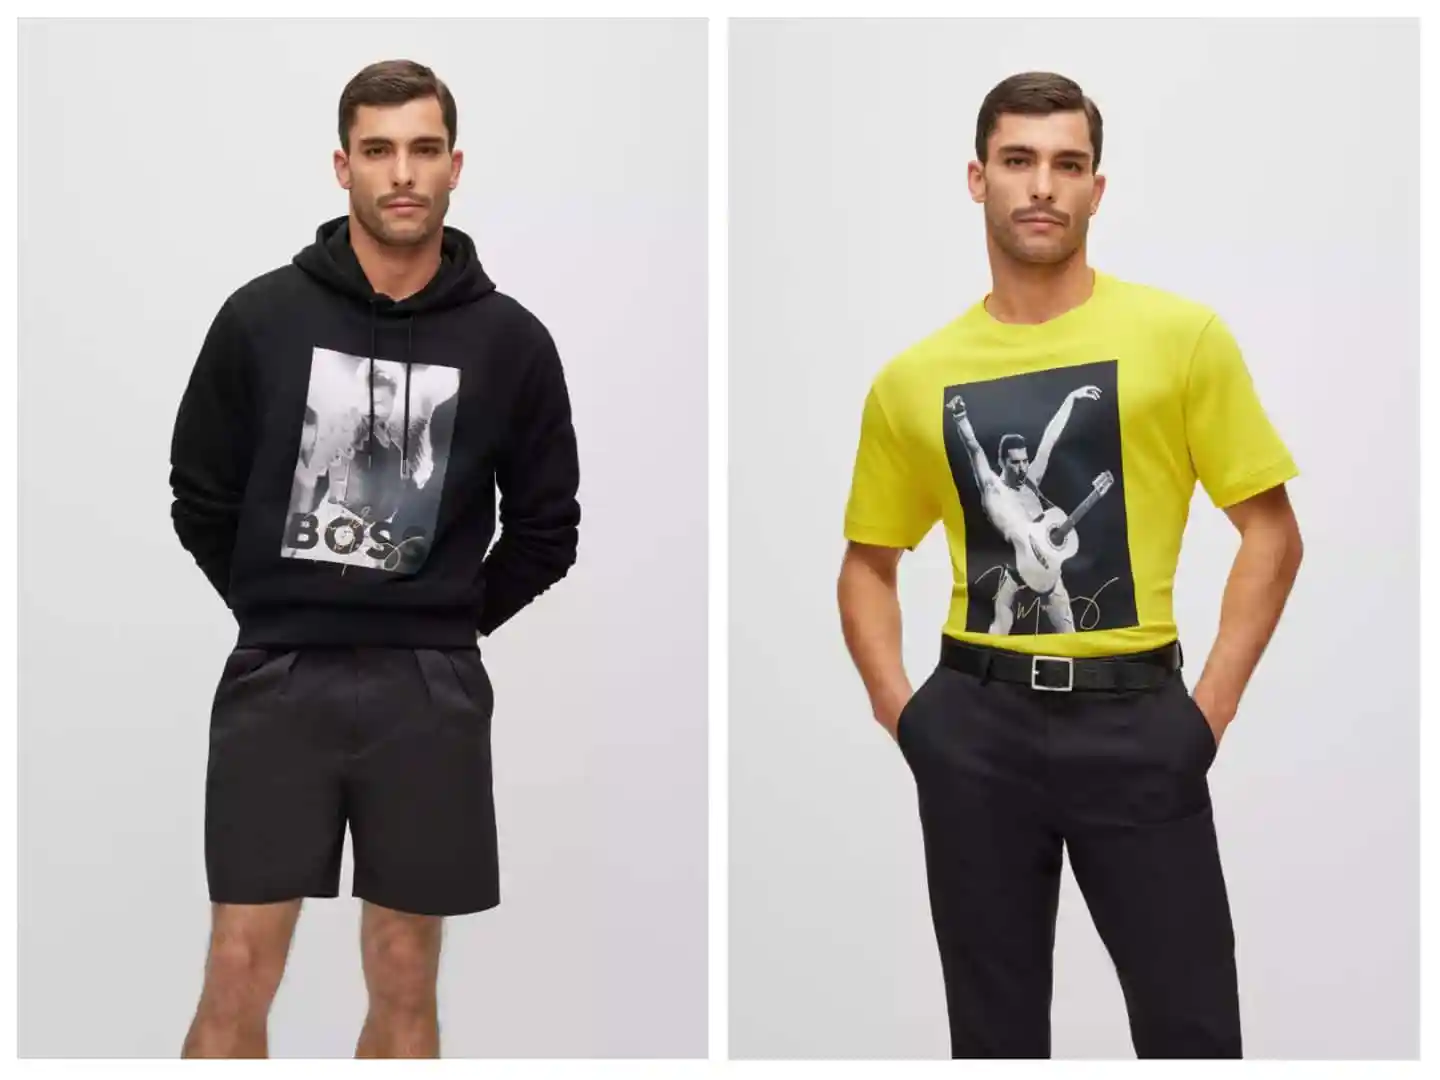 The collection features three t-shirt designs and a hoodie. (Hugo Boss)